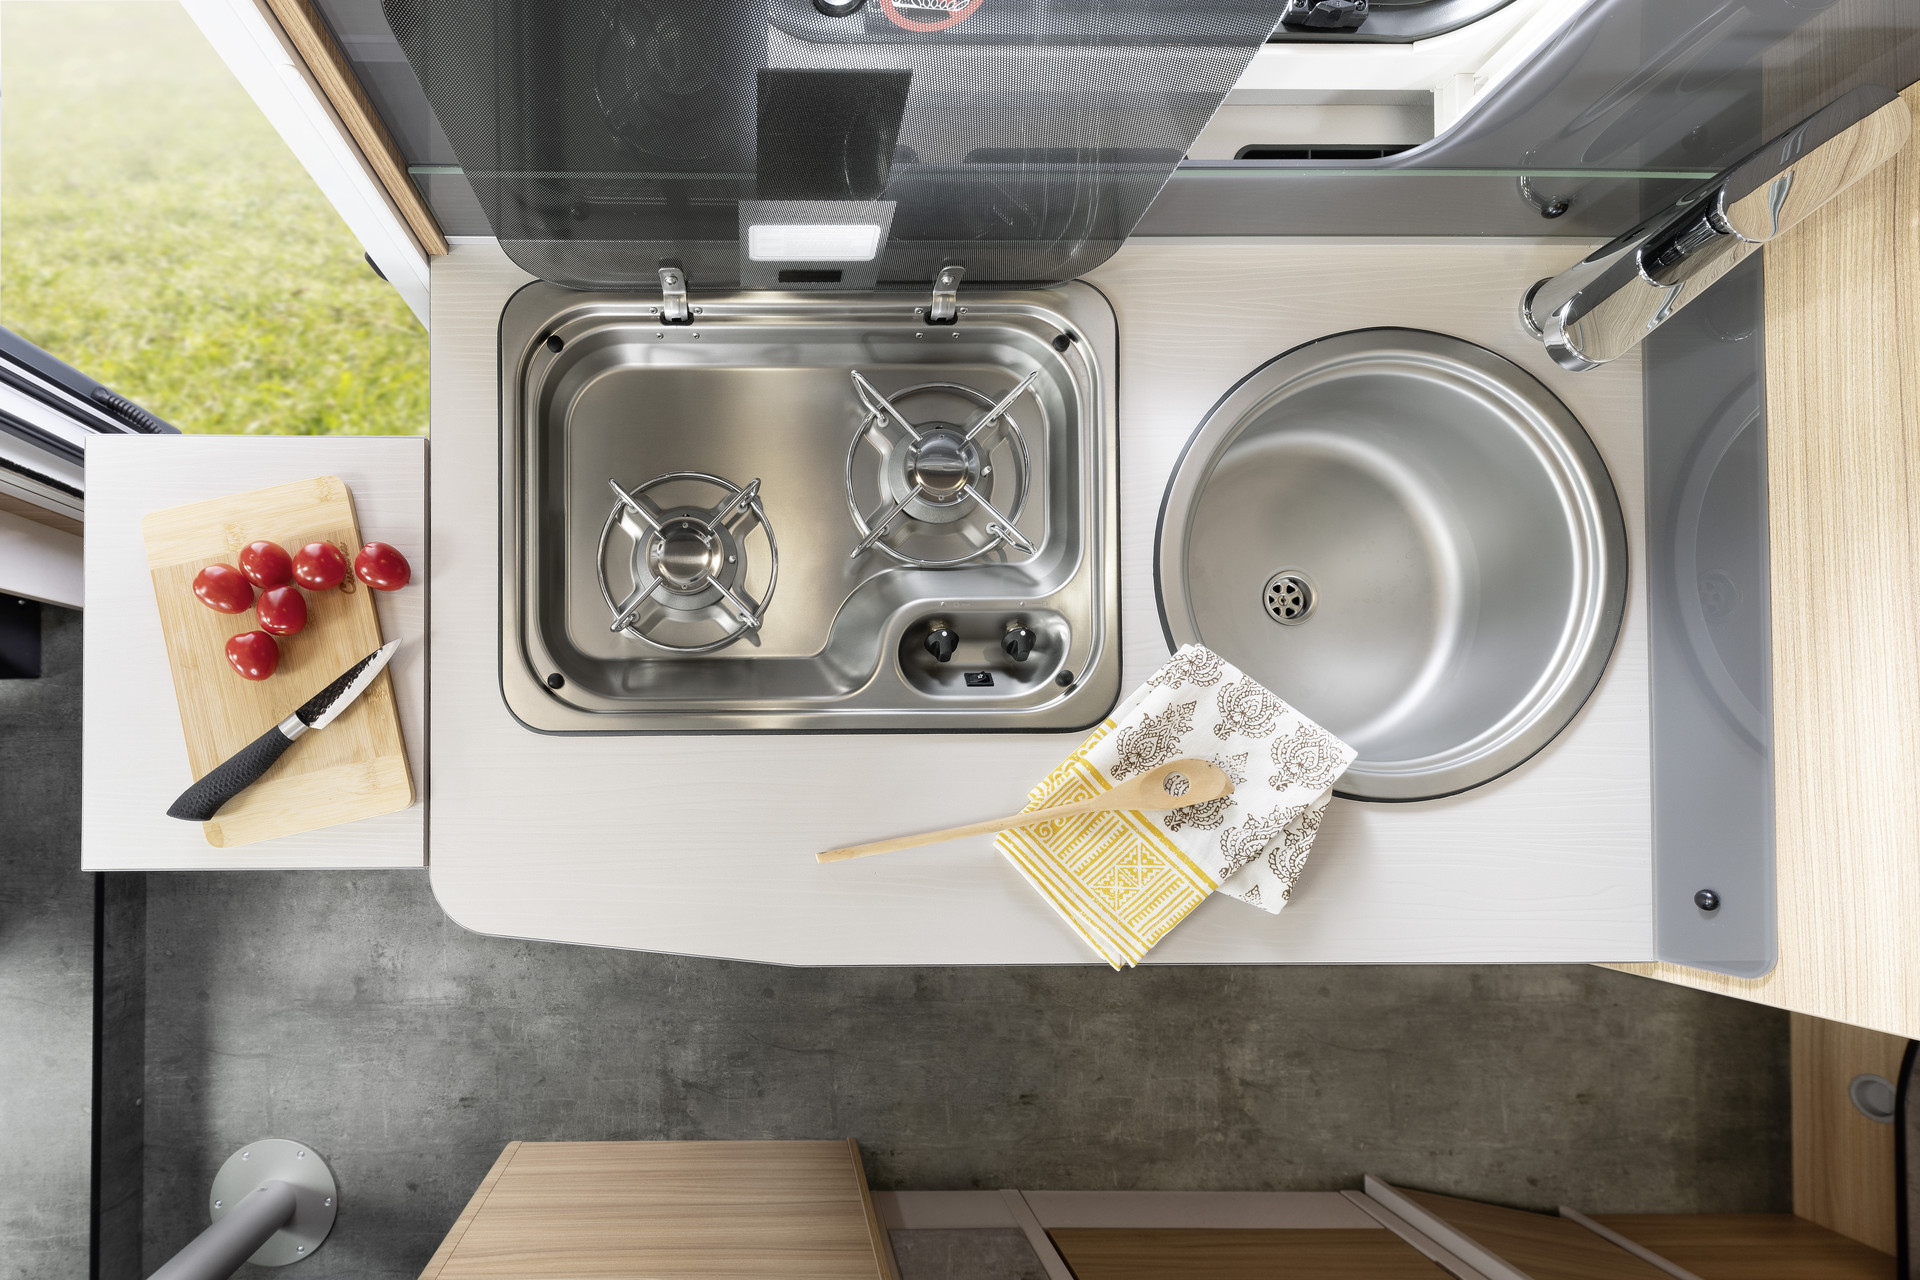 The worktop extension can be folded away very quickly when it is not needed. The 2-burner gas hob features an integrated piezo ignition. • T / I 6